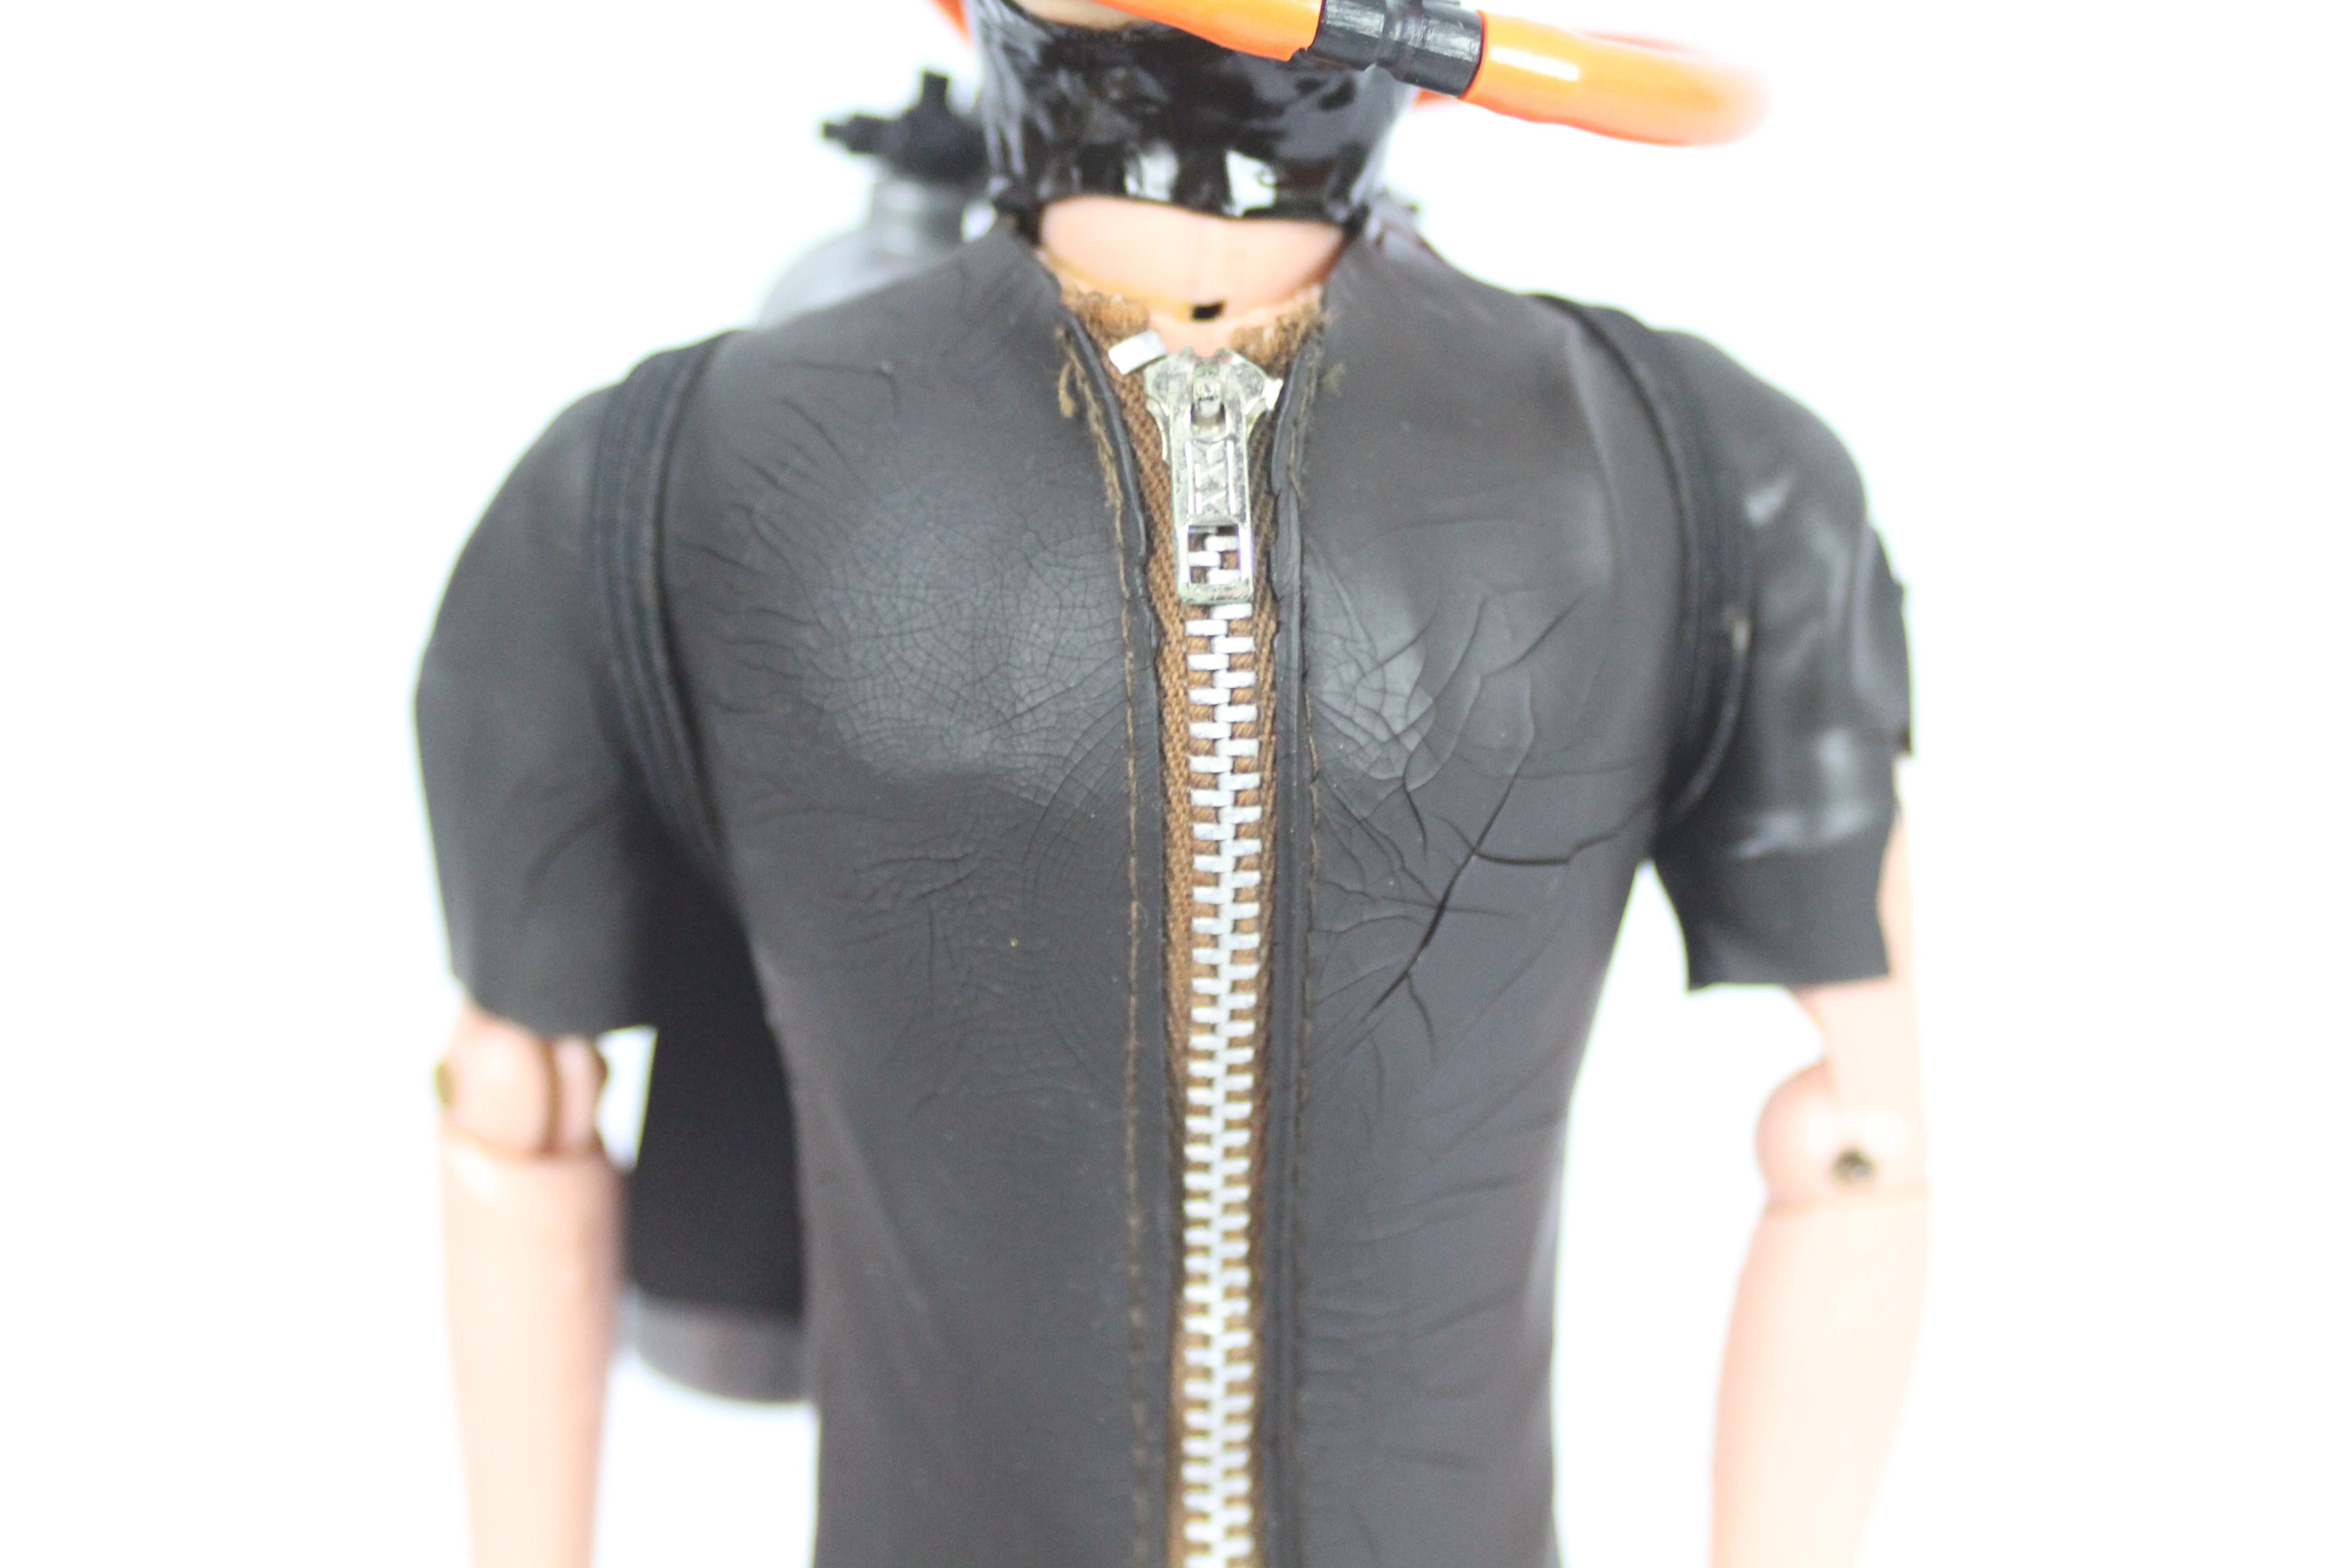 Palitoy, Action Man - A Palitoy Action Man in Frogman outfit. - Image 3 of 10